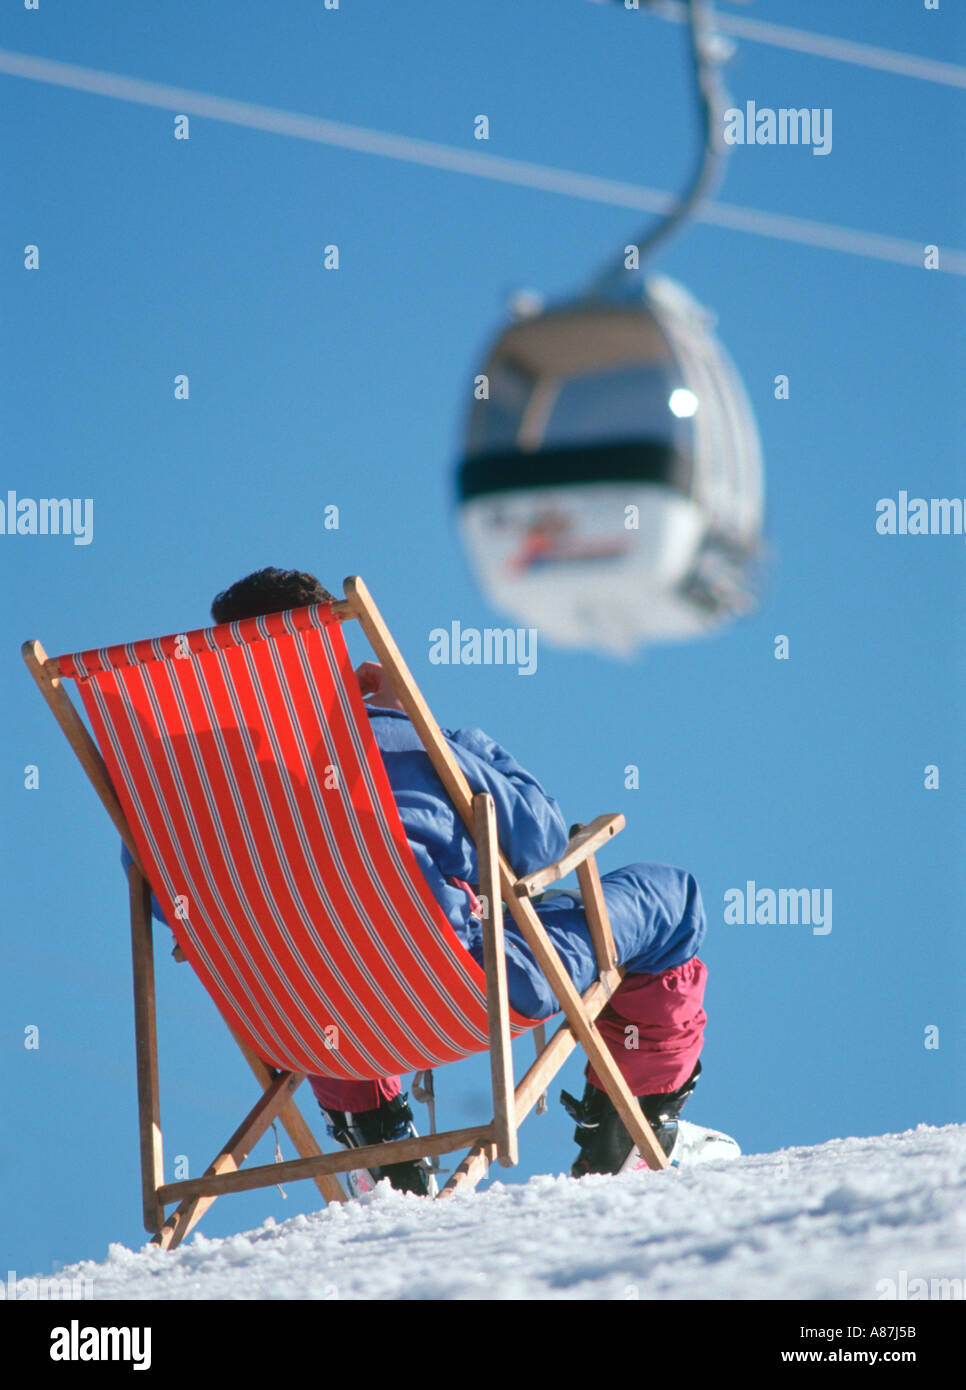 Skier relaxing in a deckchair on the ski slopes with a gondola behind,  Alpbach, Tyrol, Austria Stock Photo